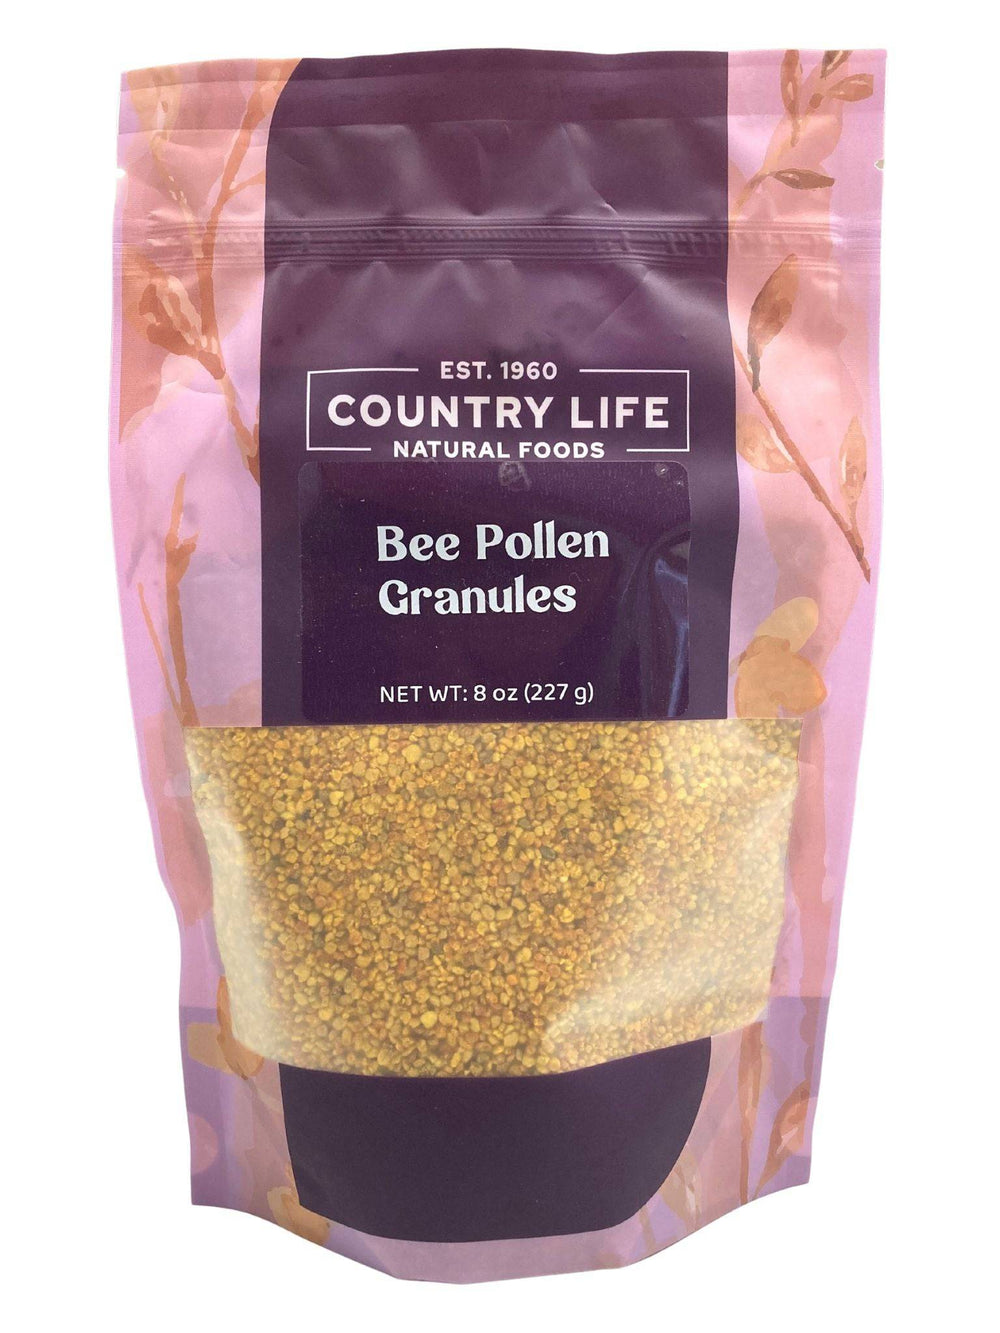 Bee Pollen Granules - Country Life Natural Foods